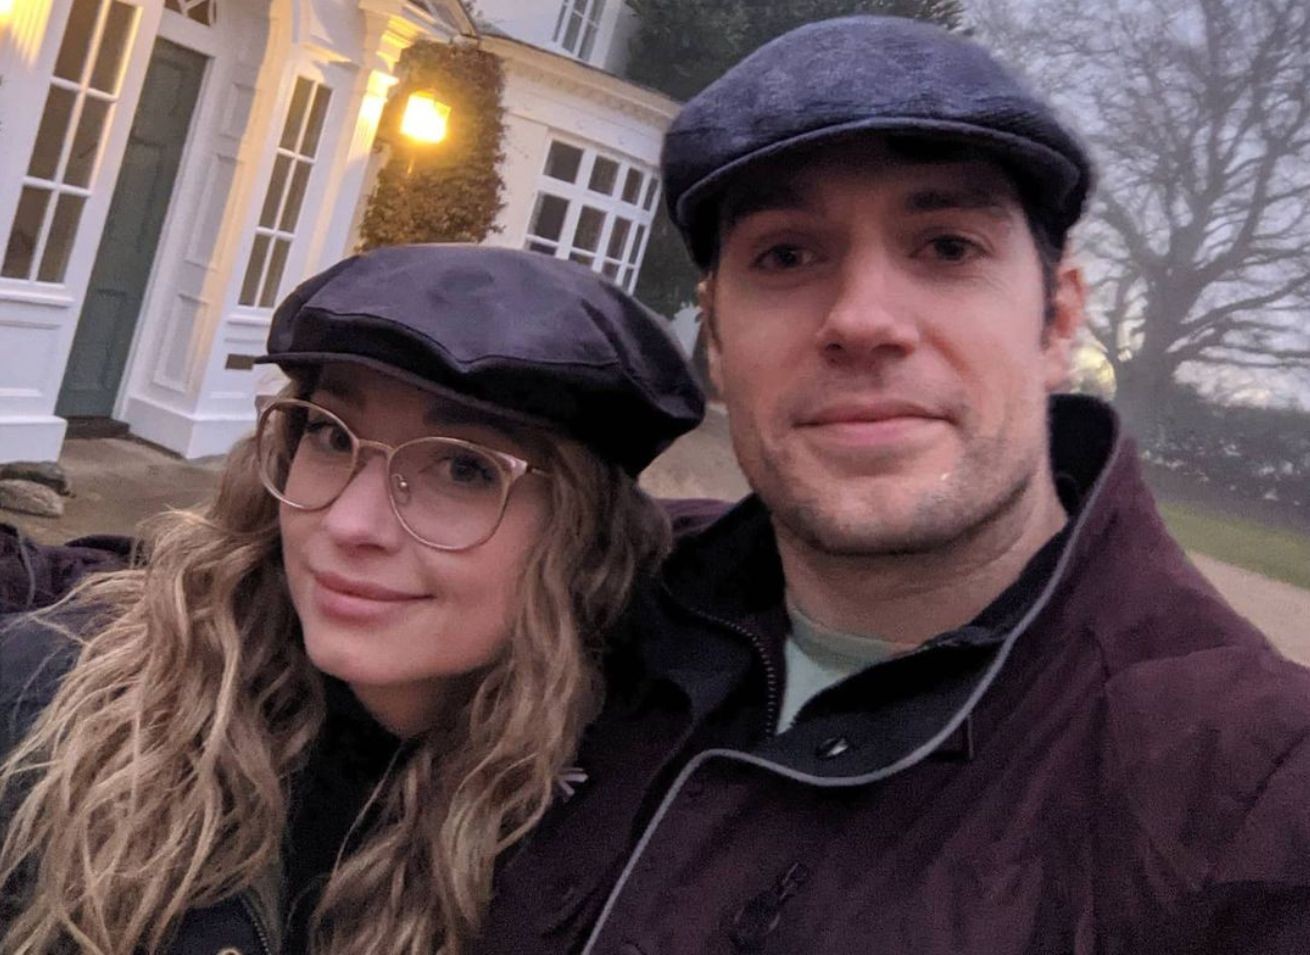 Henry Cavill and Natalie Viscuso in one of their Instagram posts.